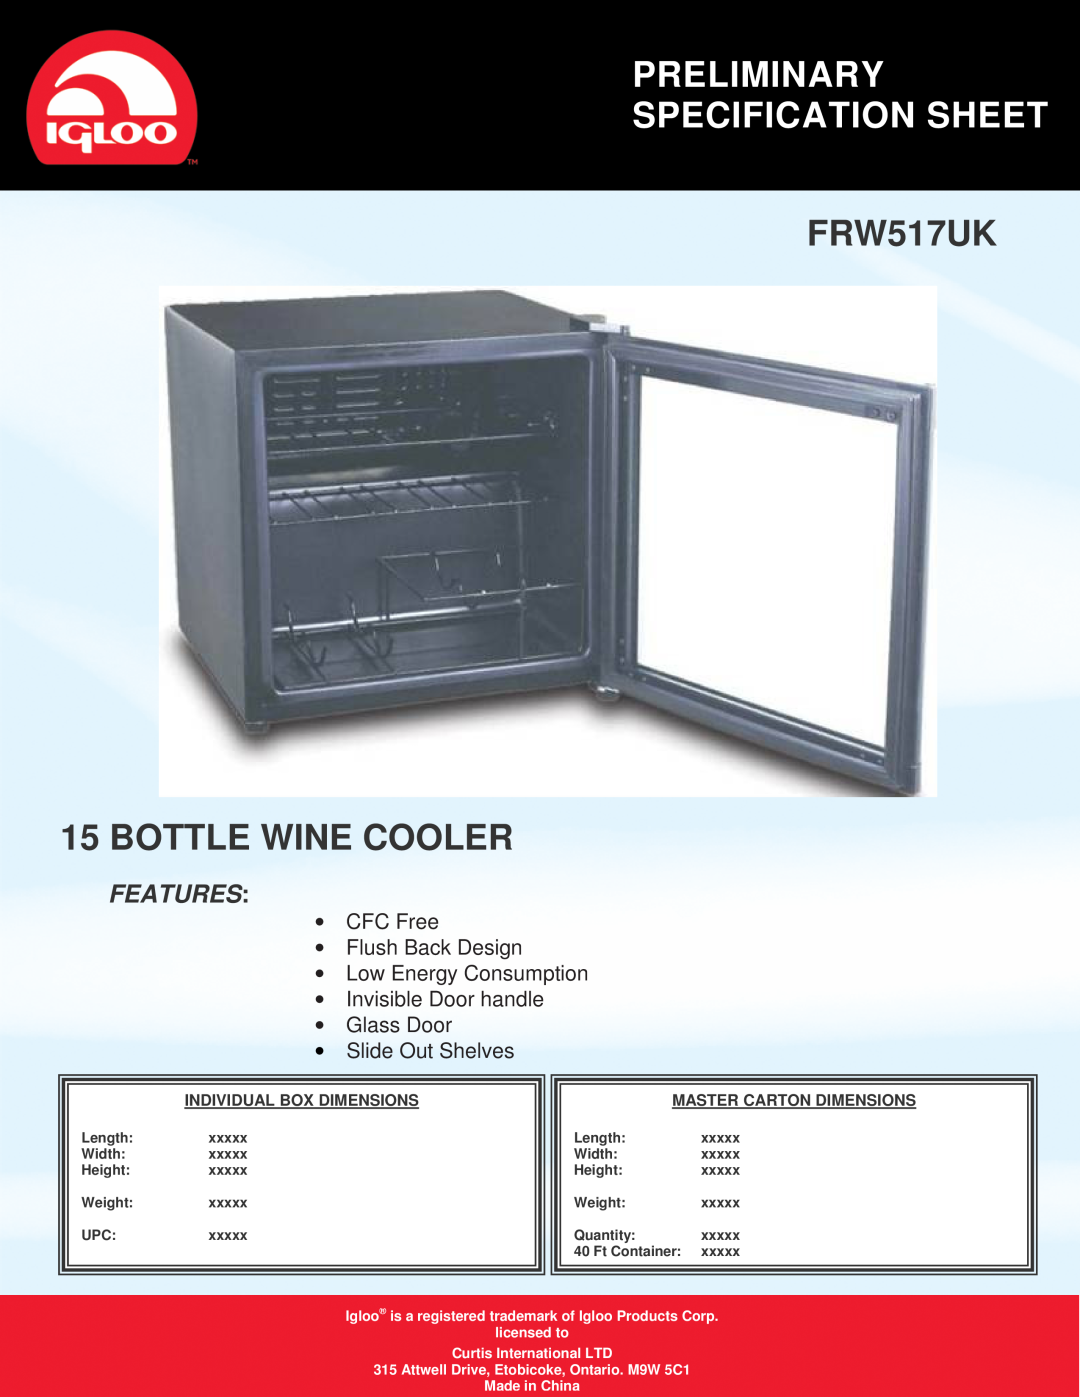 Igloo specifications Preliminary Specification Sheet, FRW517UK 15 BOTTLE WINE COOLER, Features, Made in China 